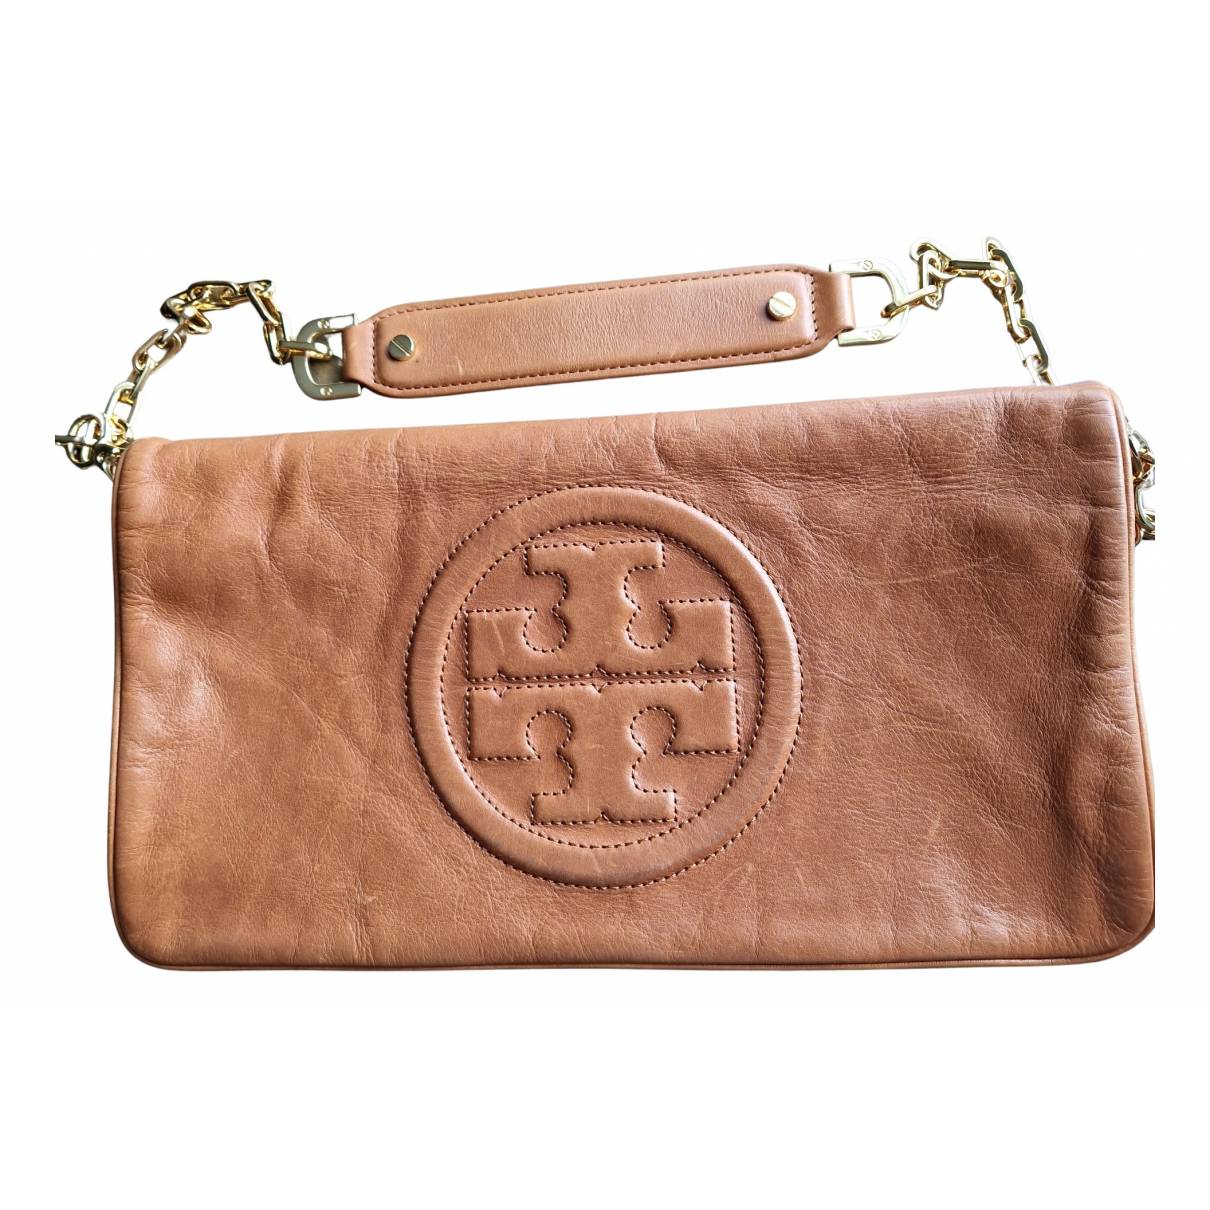 Leather handbag Tory Burch Camel in Leather - 31889342